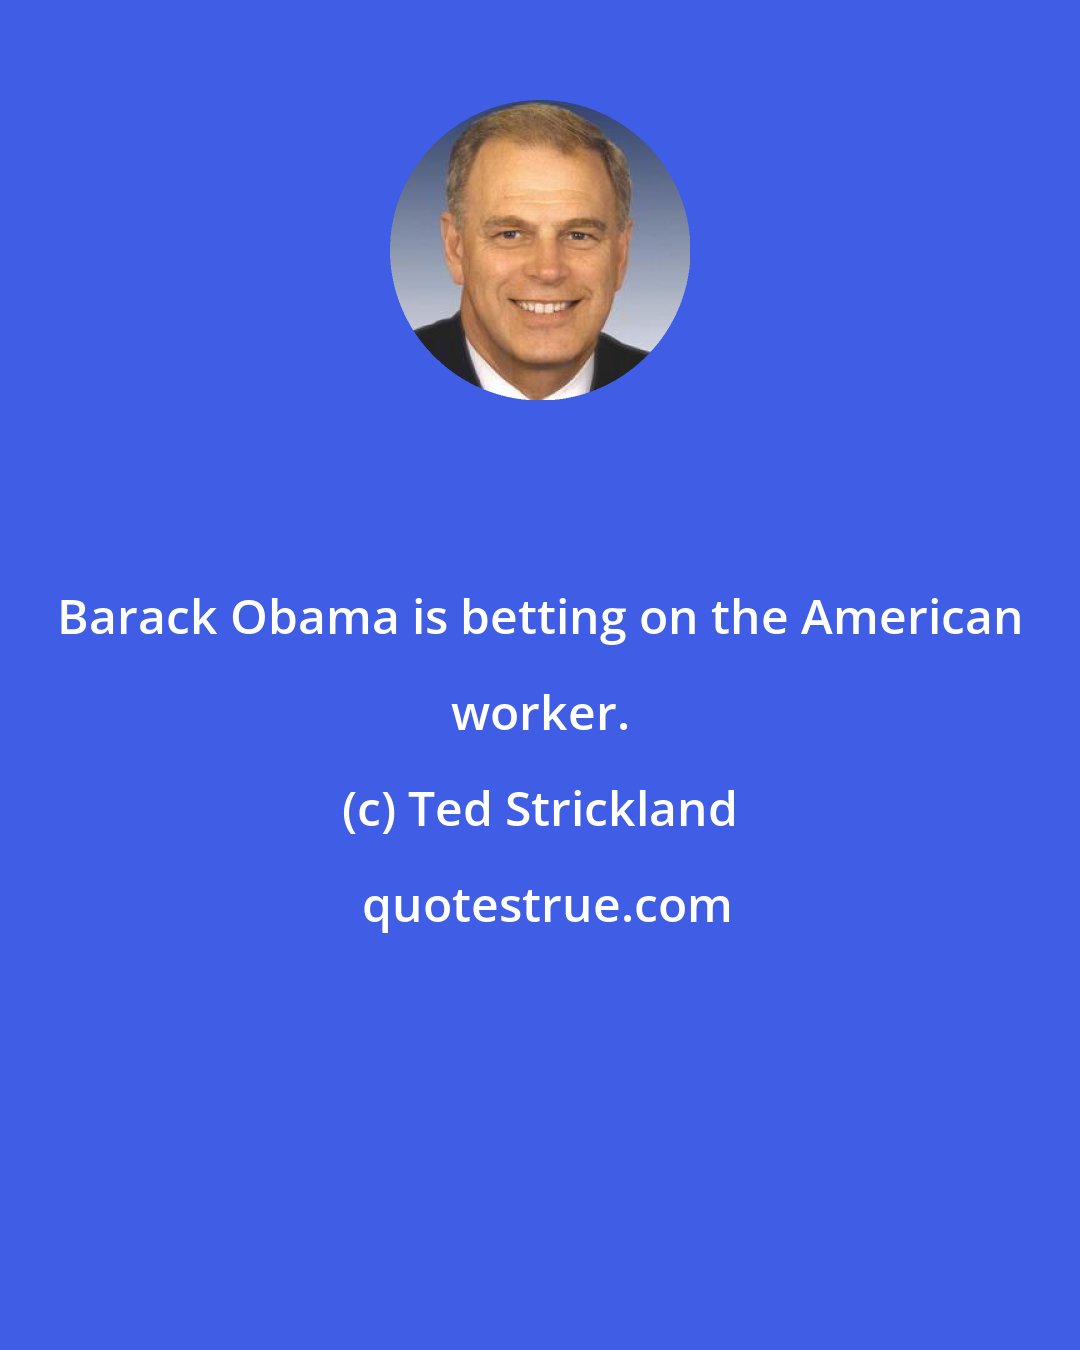 Ted Strickland: Barack Obama is betting on the American worker.